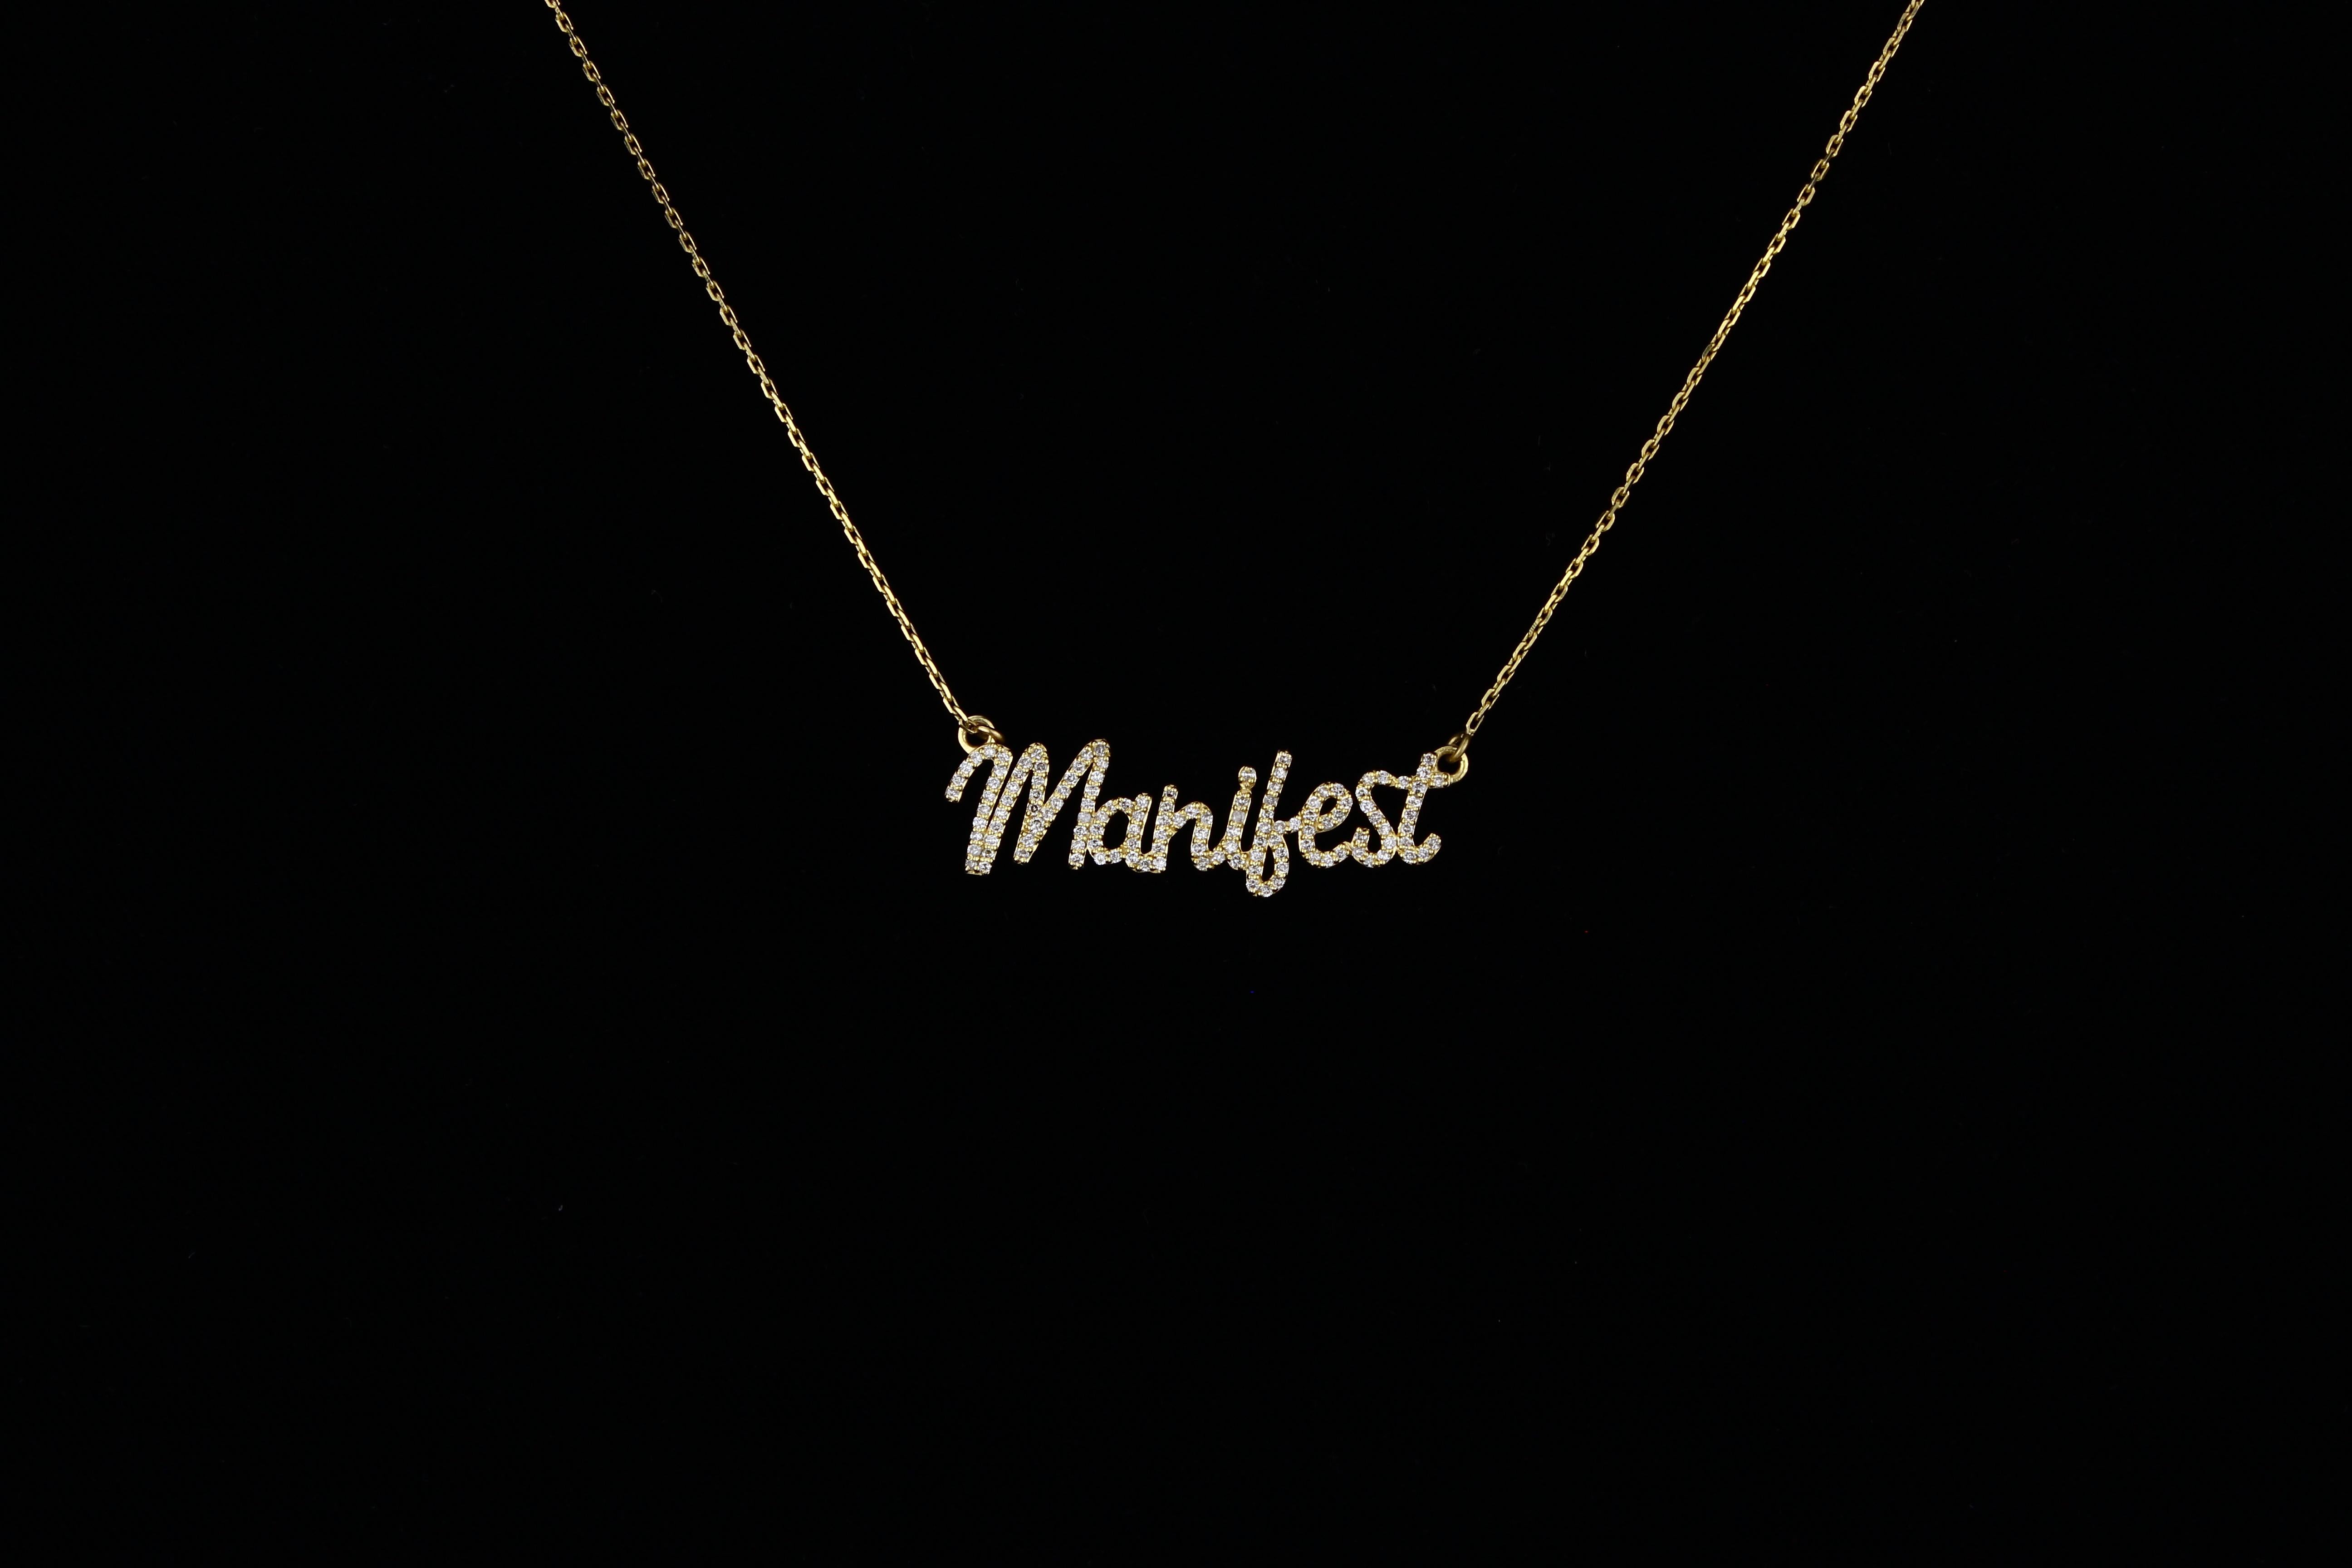 Women's Diamond Manifest Pendant Necklace in 18k Solid Gold For Sale